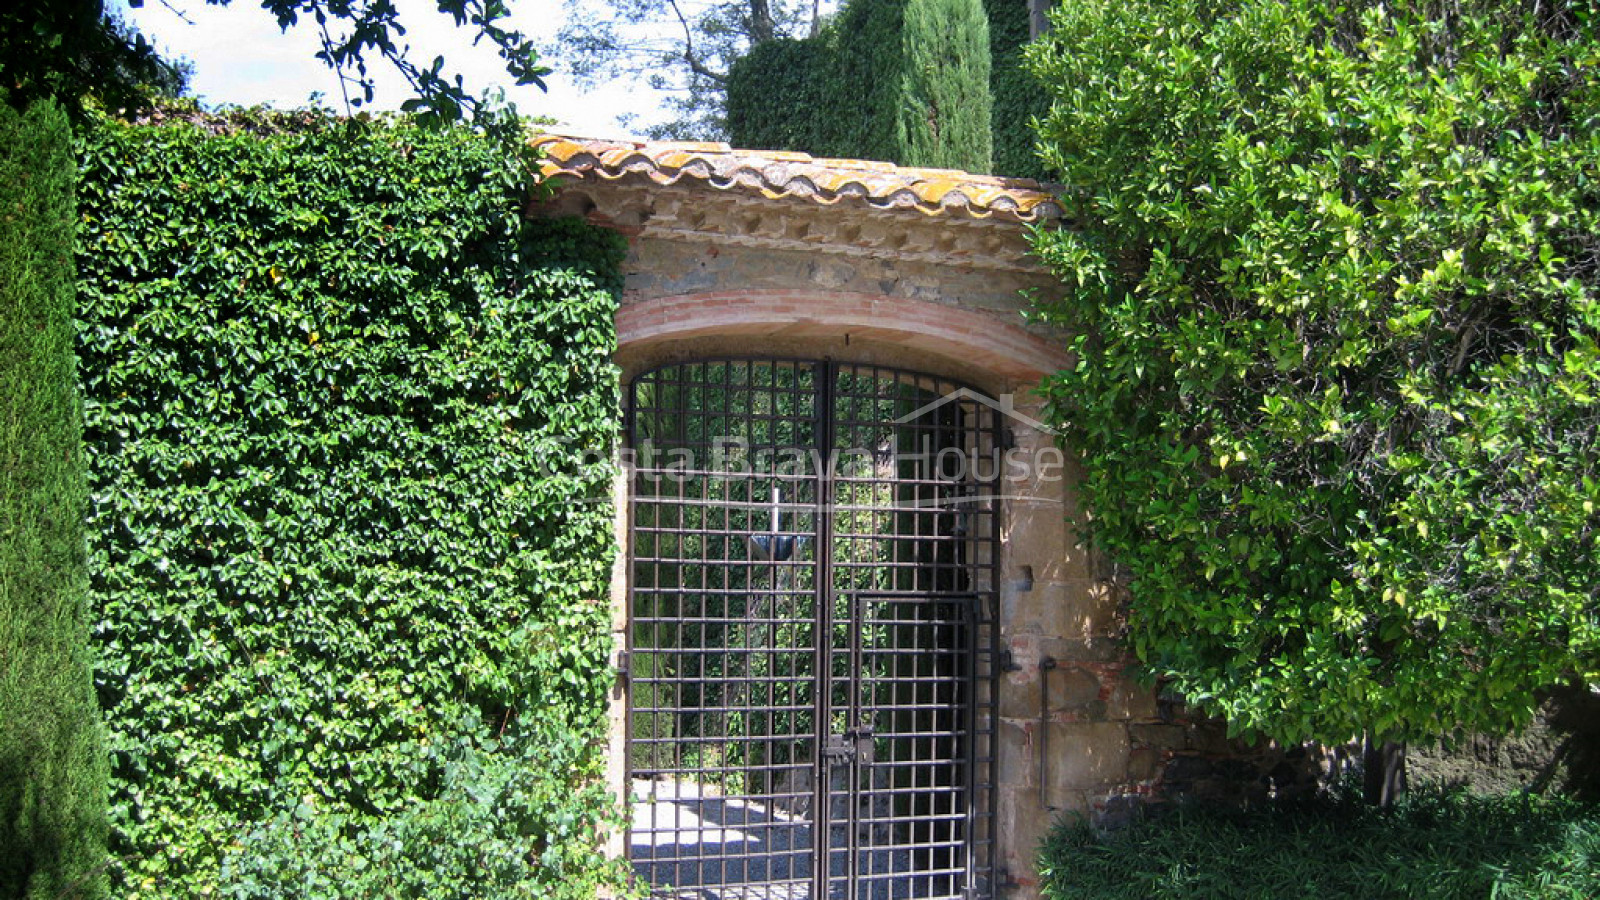 13th century castle perfectly restored for sale in Baix Empordà